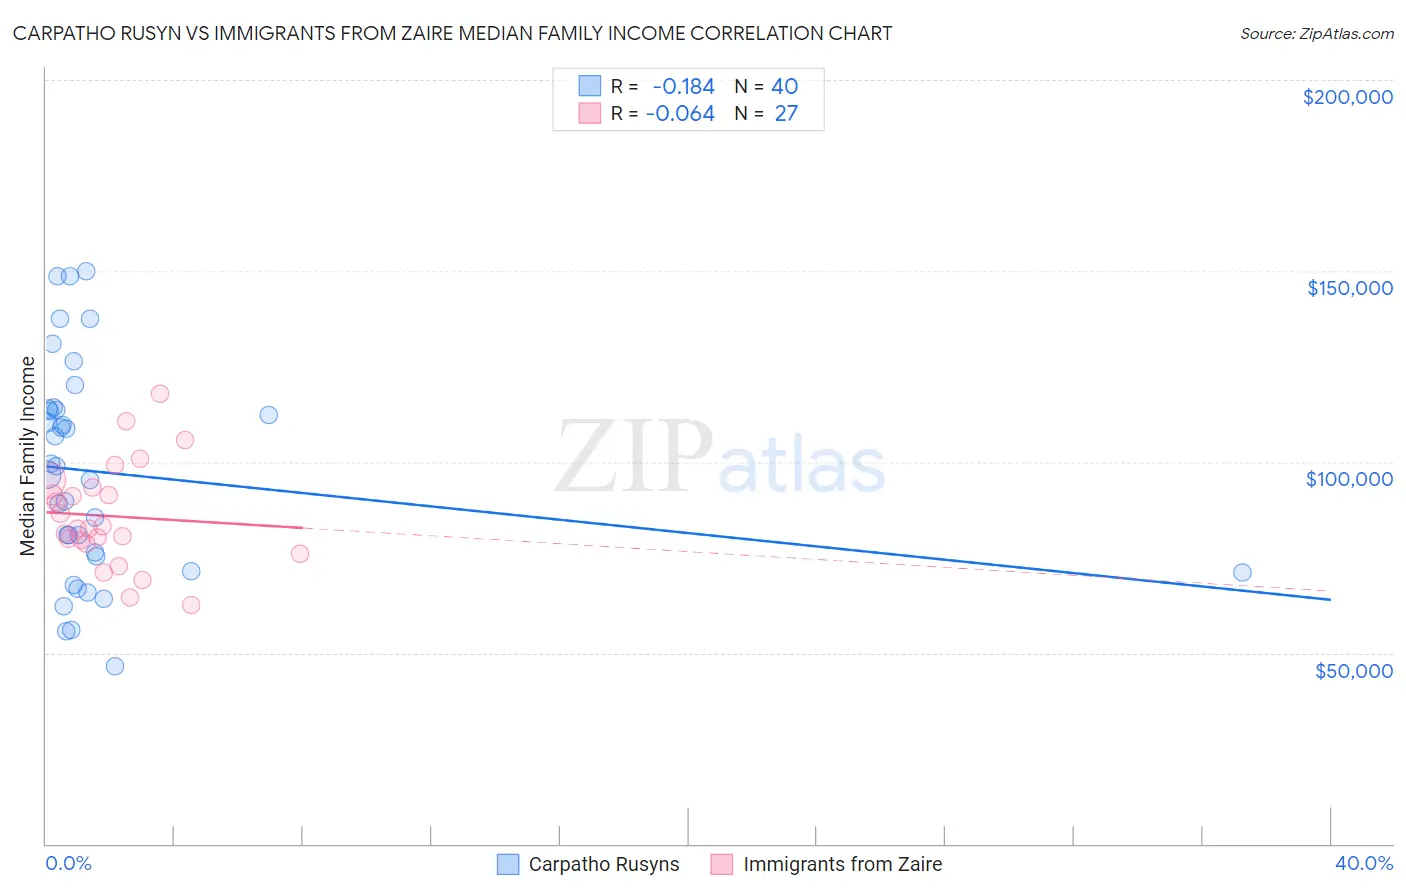 Carpatho Rusyn vs Immigrants from Zaire Median Family Income